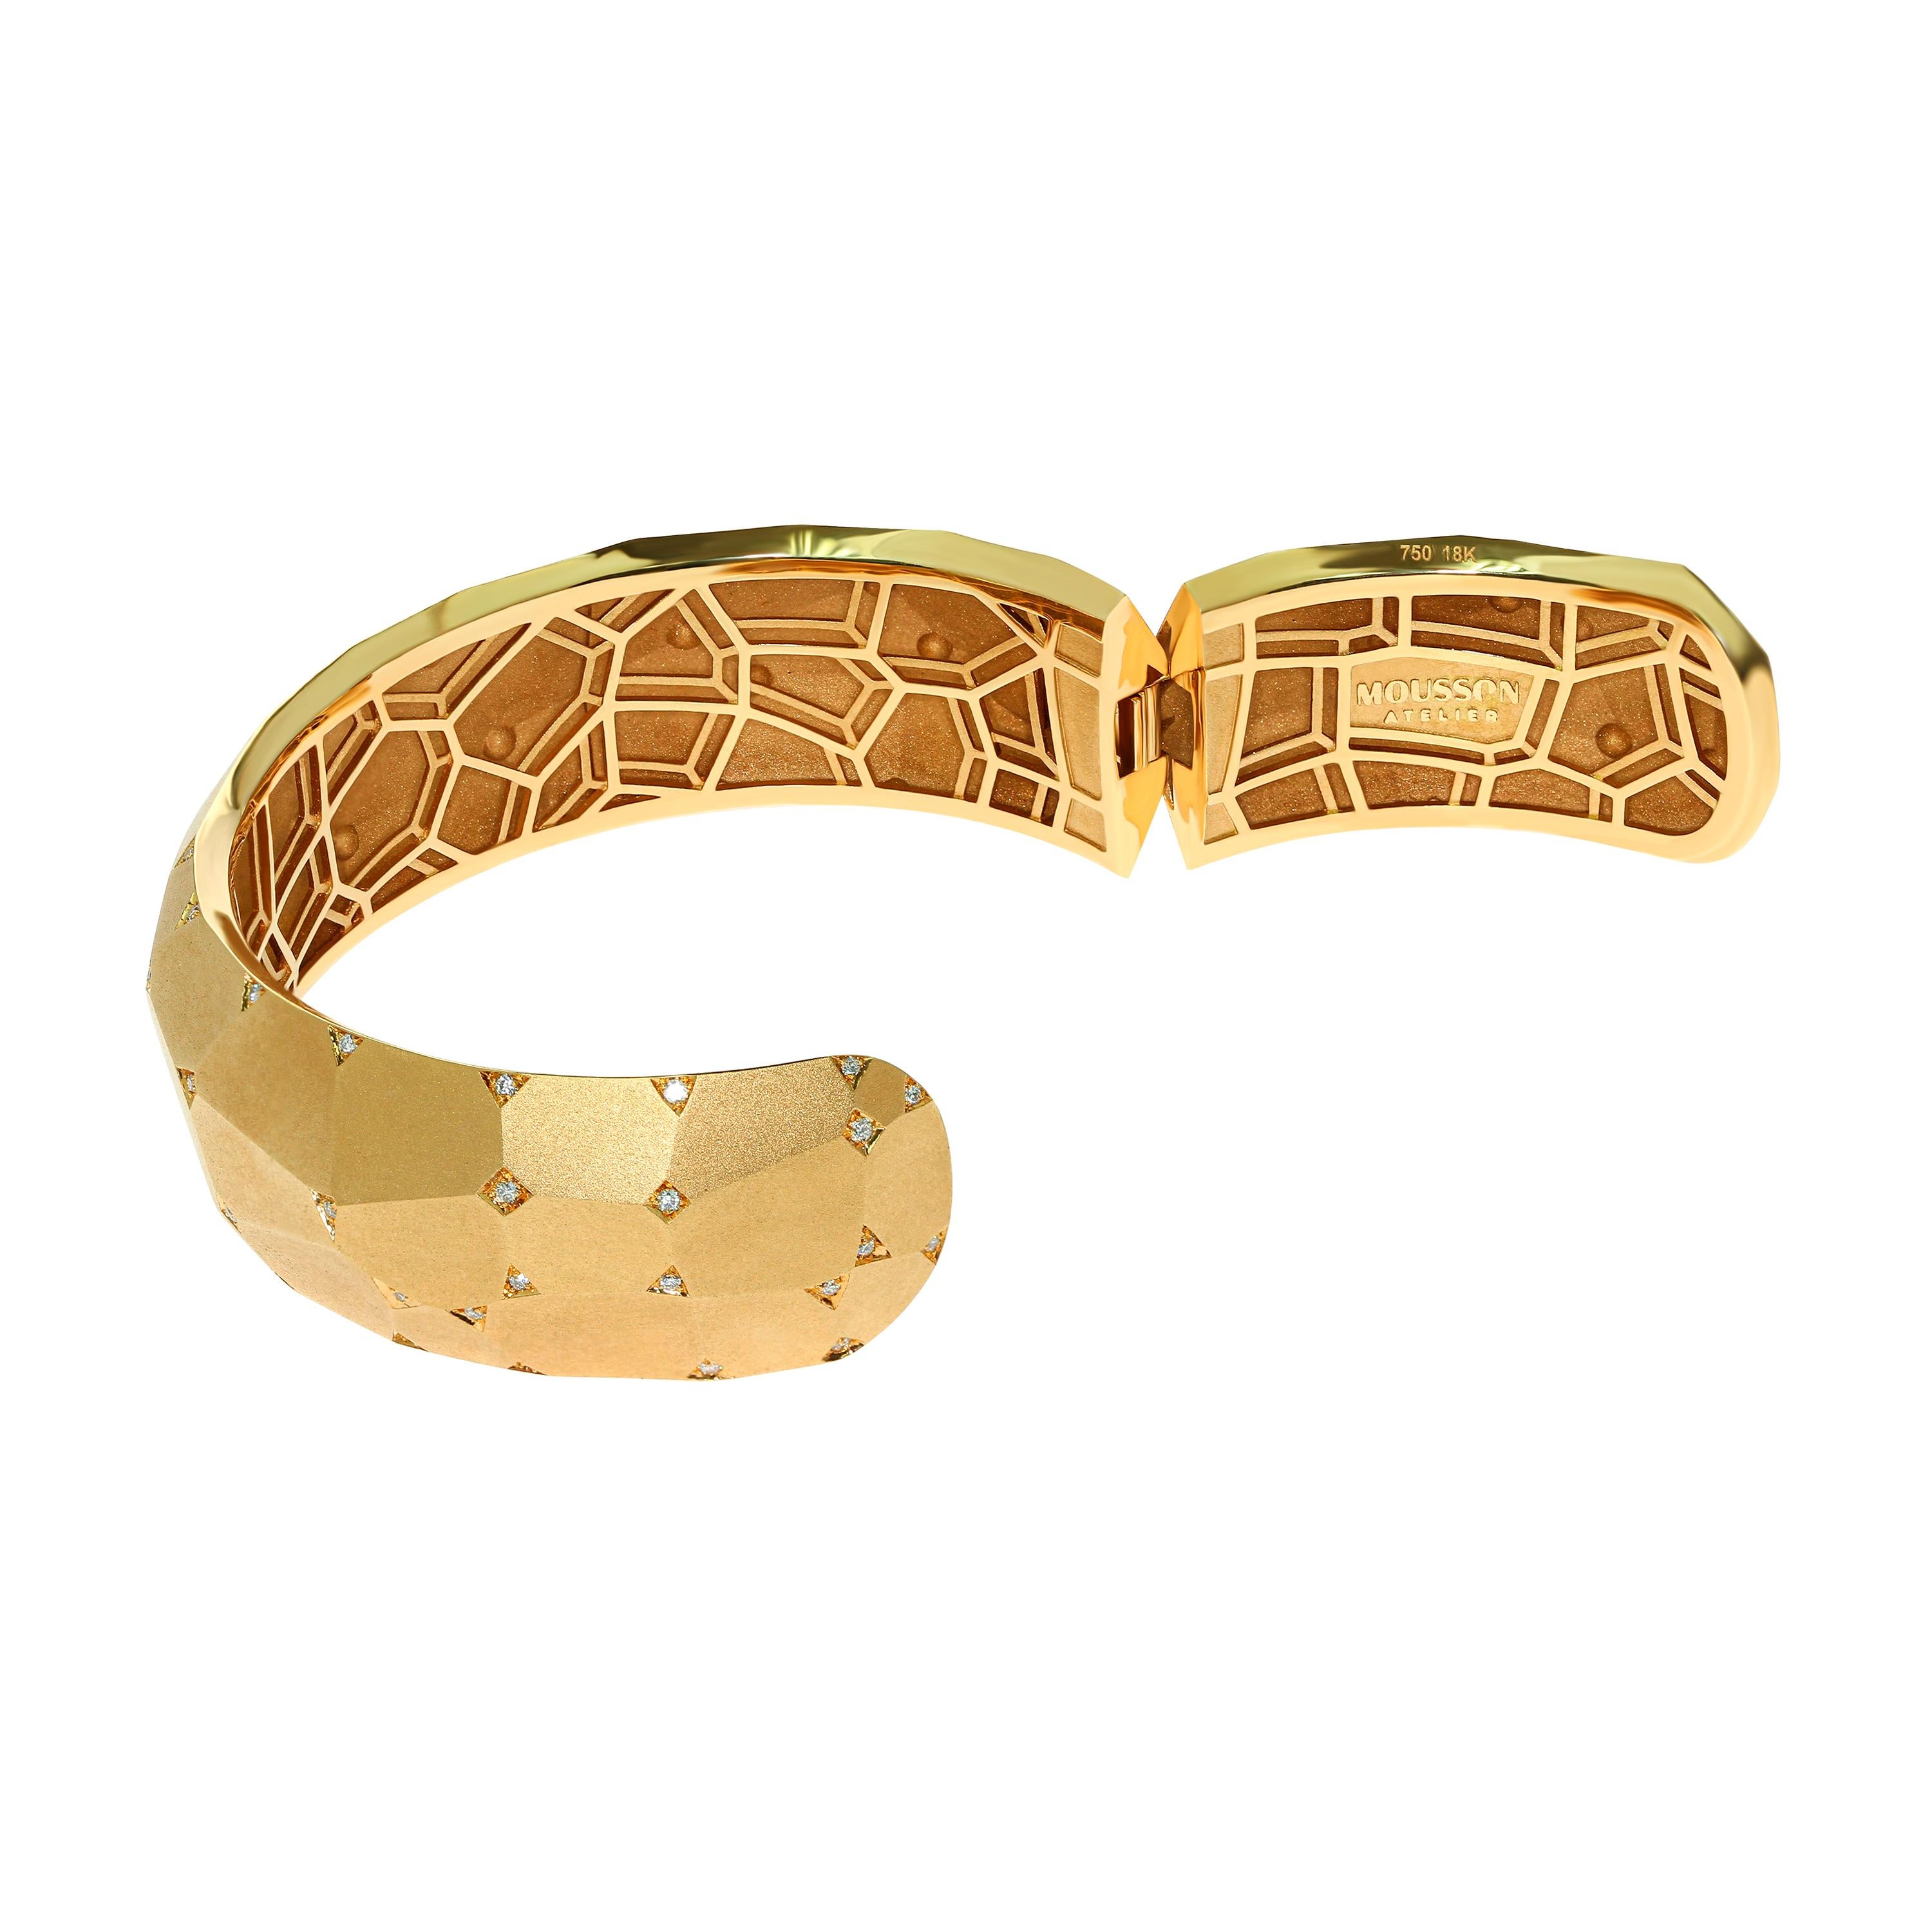 Diamonds 18 Karat Yellow Matte Gold Geometry Small Bracelet
We present to your attention our New Collection 